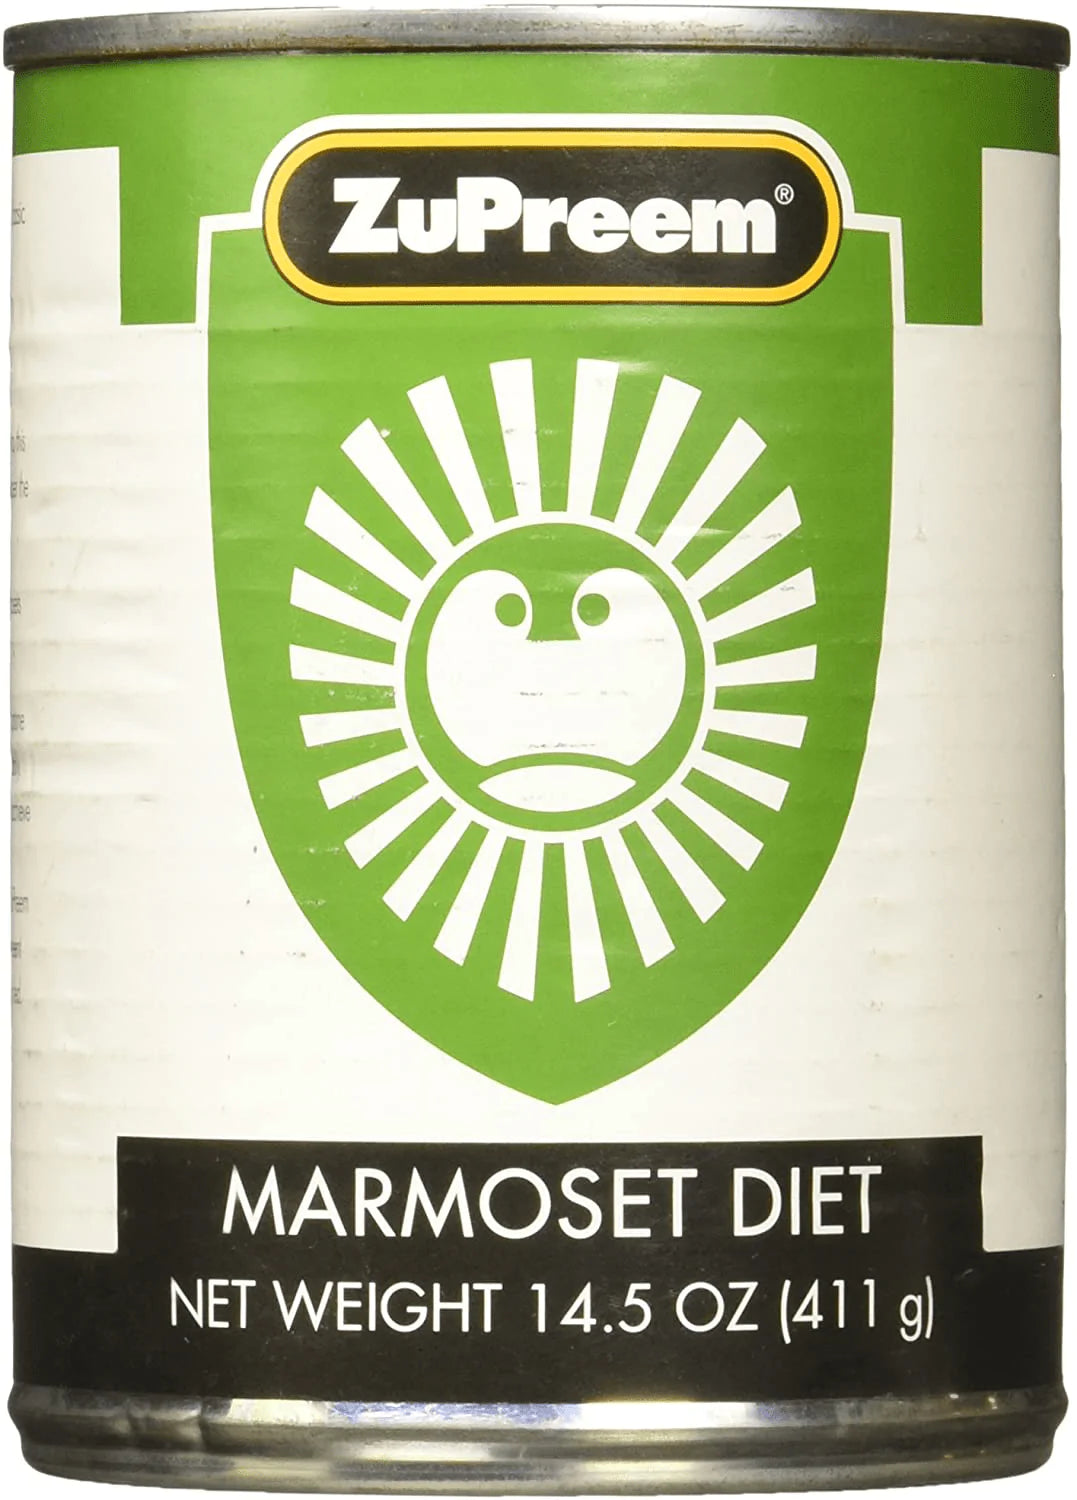 Zupreem Marmoset Diet Food, 14.5 Oz/Pack, 24 Can-Pack